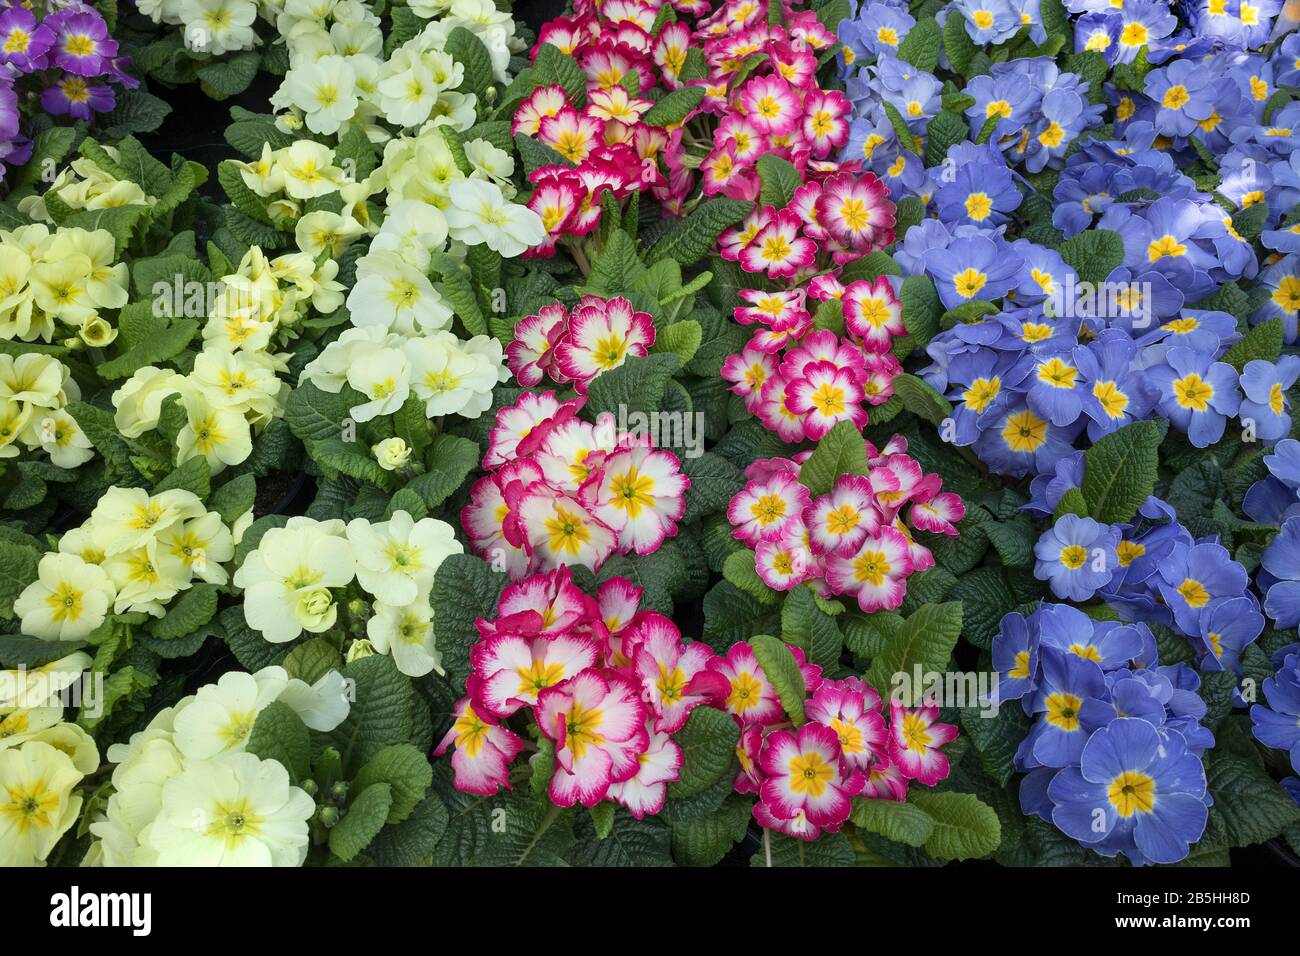 Variety of colorful cultivated primula plants full frame Stock Photo